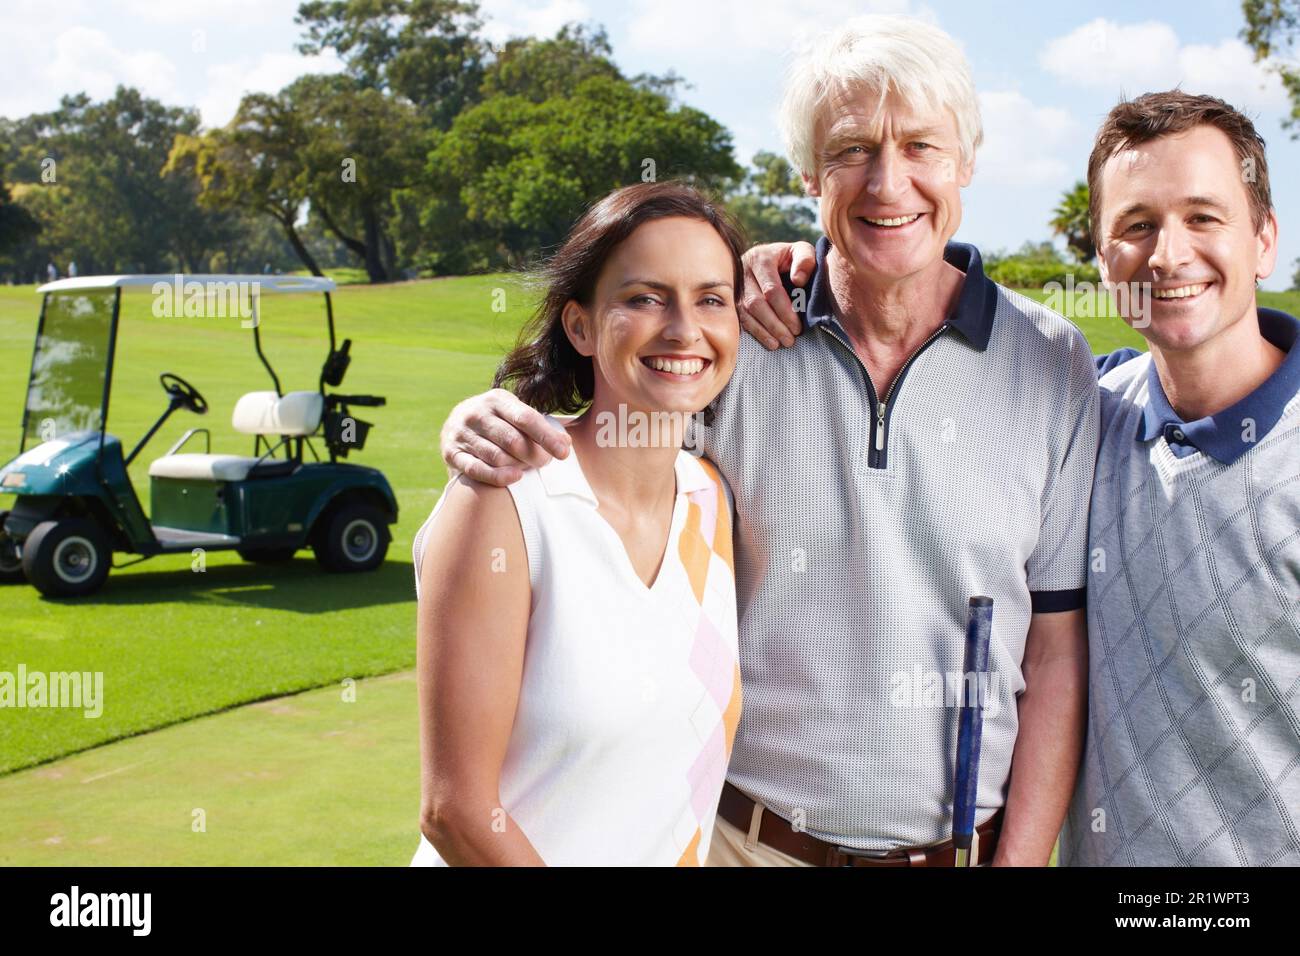 Connected by a mutual love of golf. Smiling golfing companions on the green with their golf cart in the background. Stock Photo